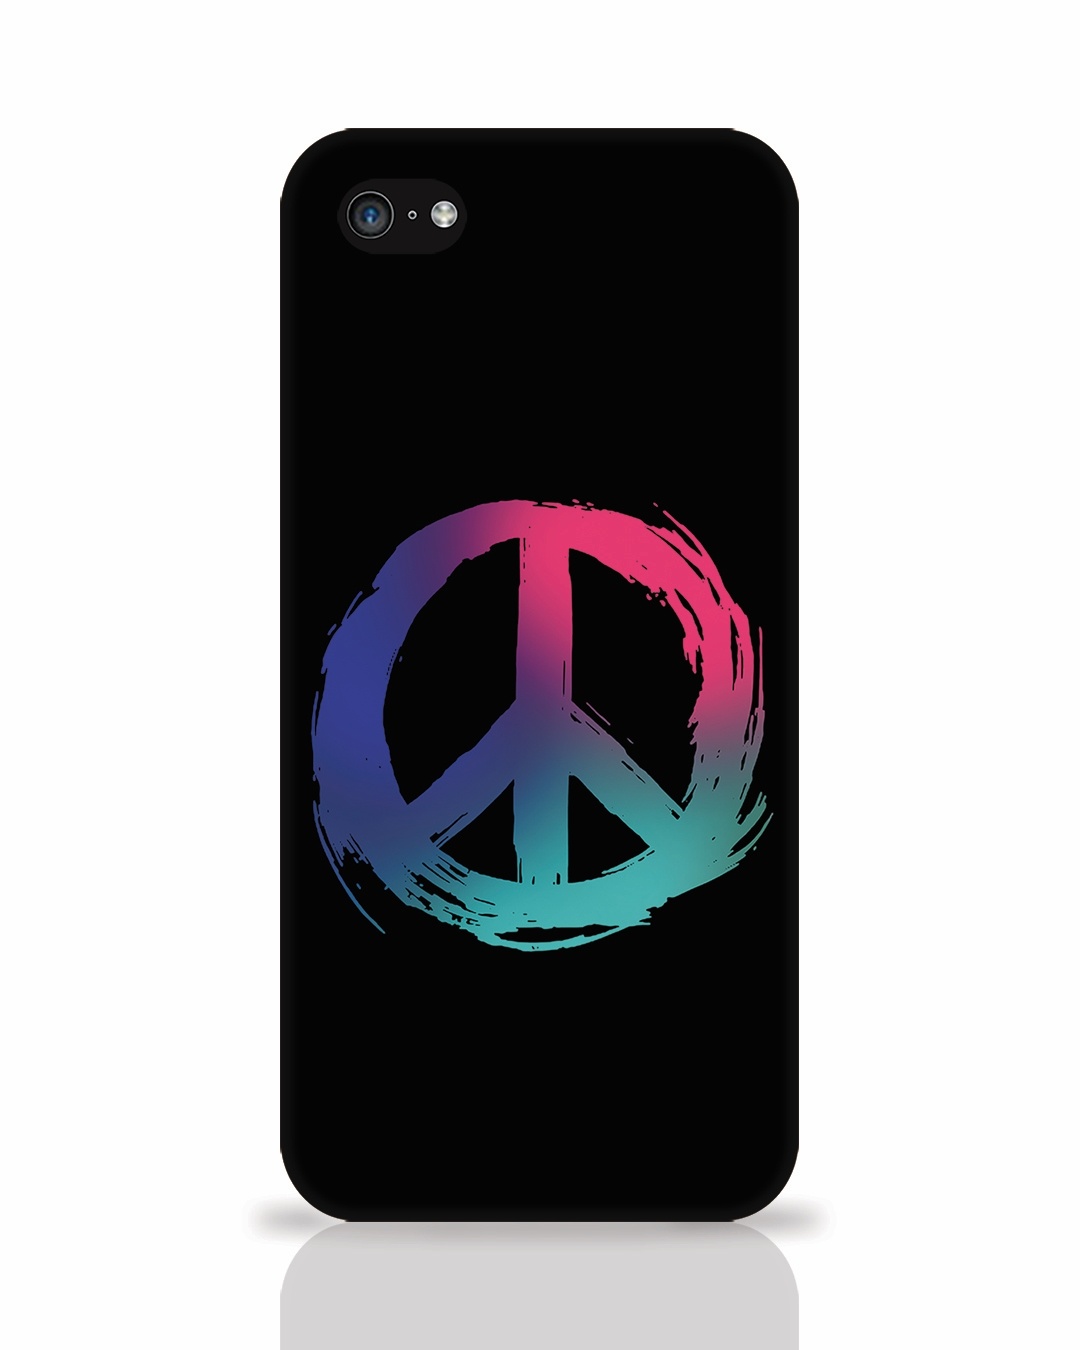 Colors Of Peace iPhone 5c Mobile Cover iPhone 5c Mobile Covers Bewakoof.com